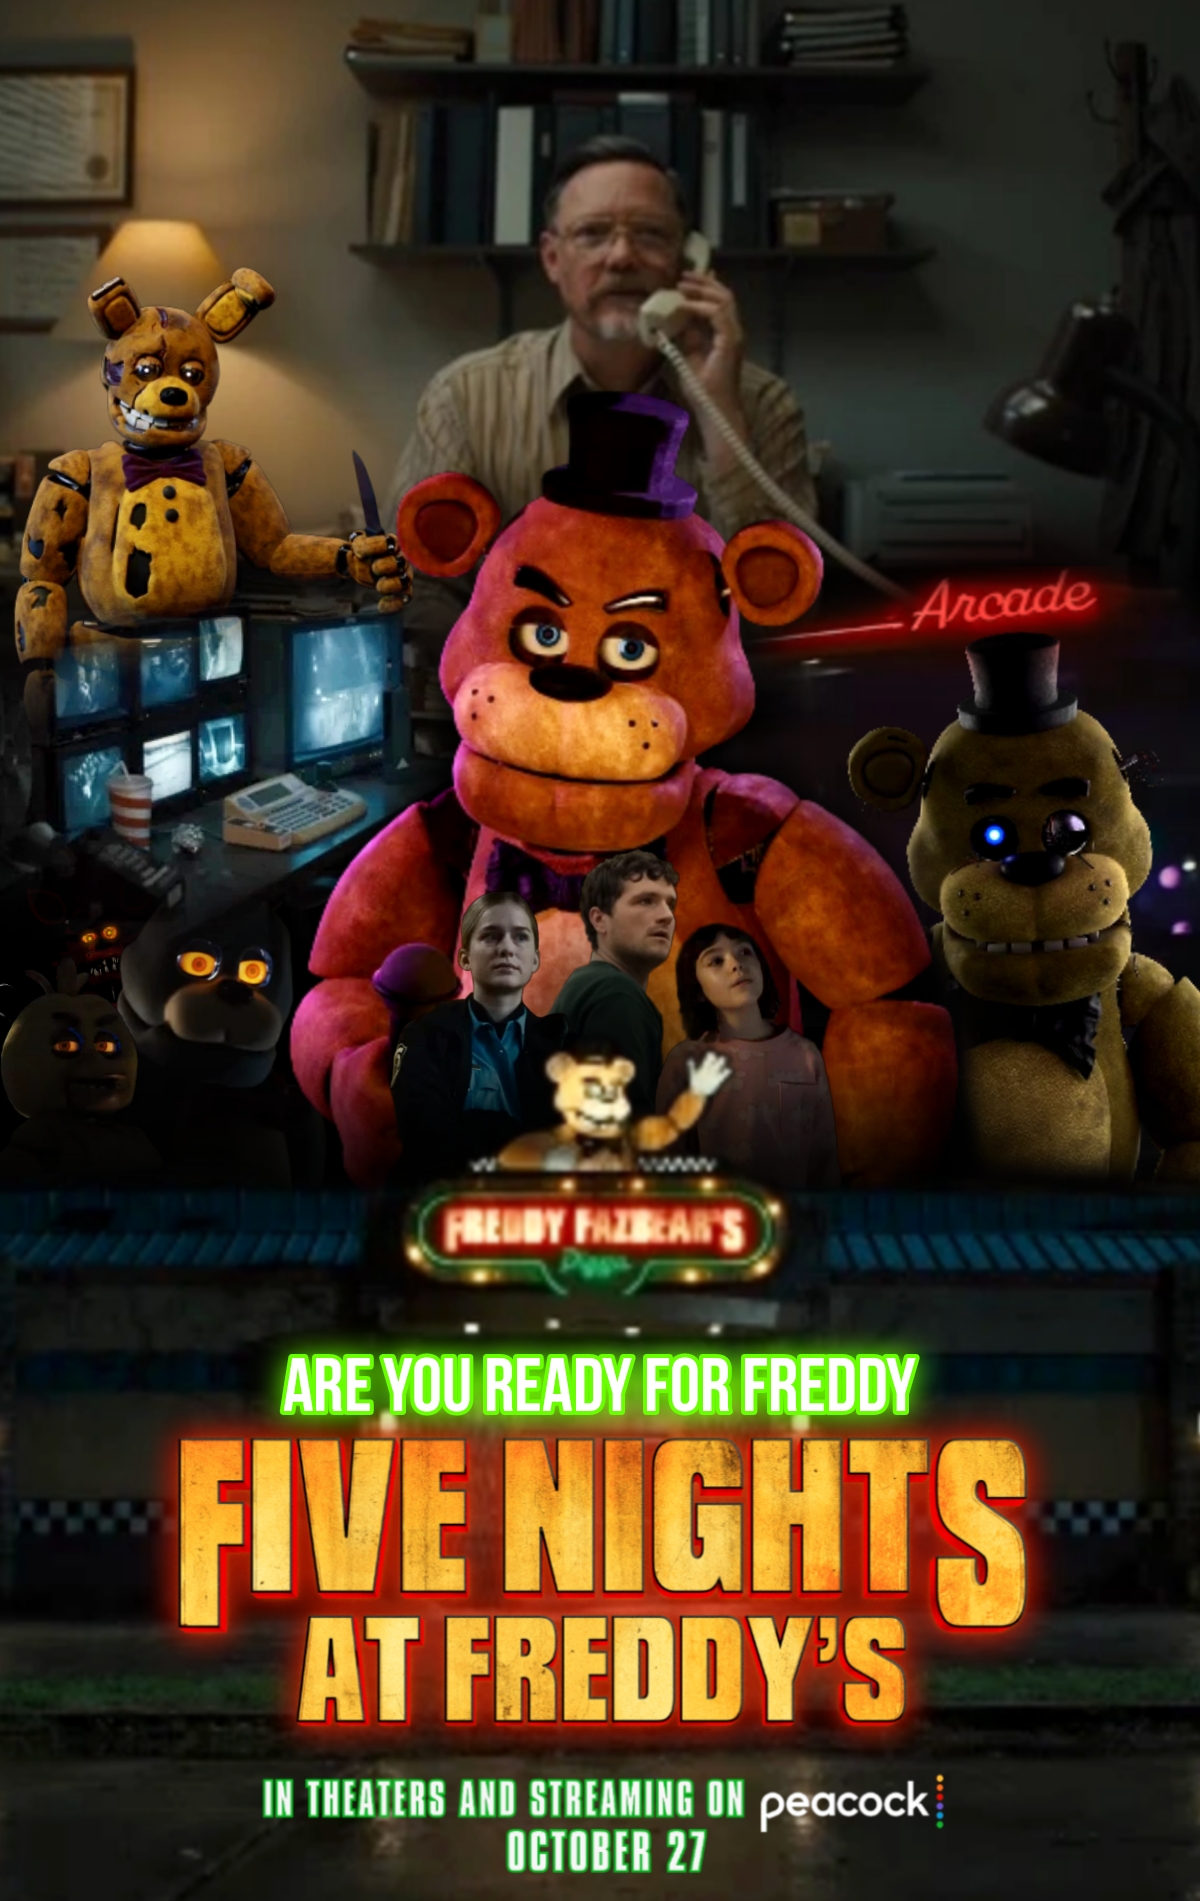 Are you ready for Five Nights at Freddy's? - JB Hi-Fi